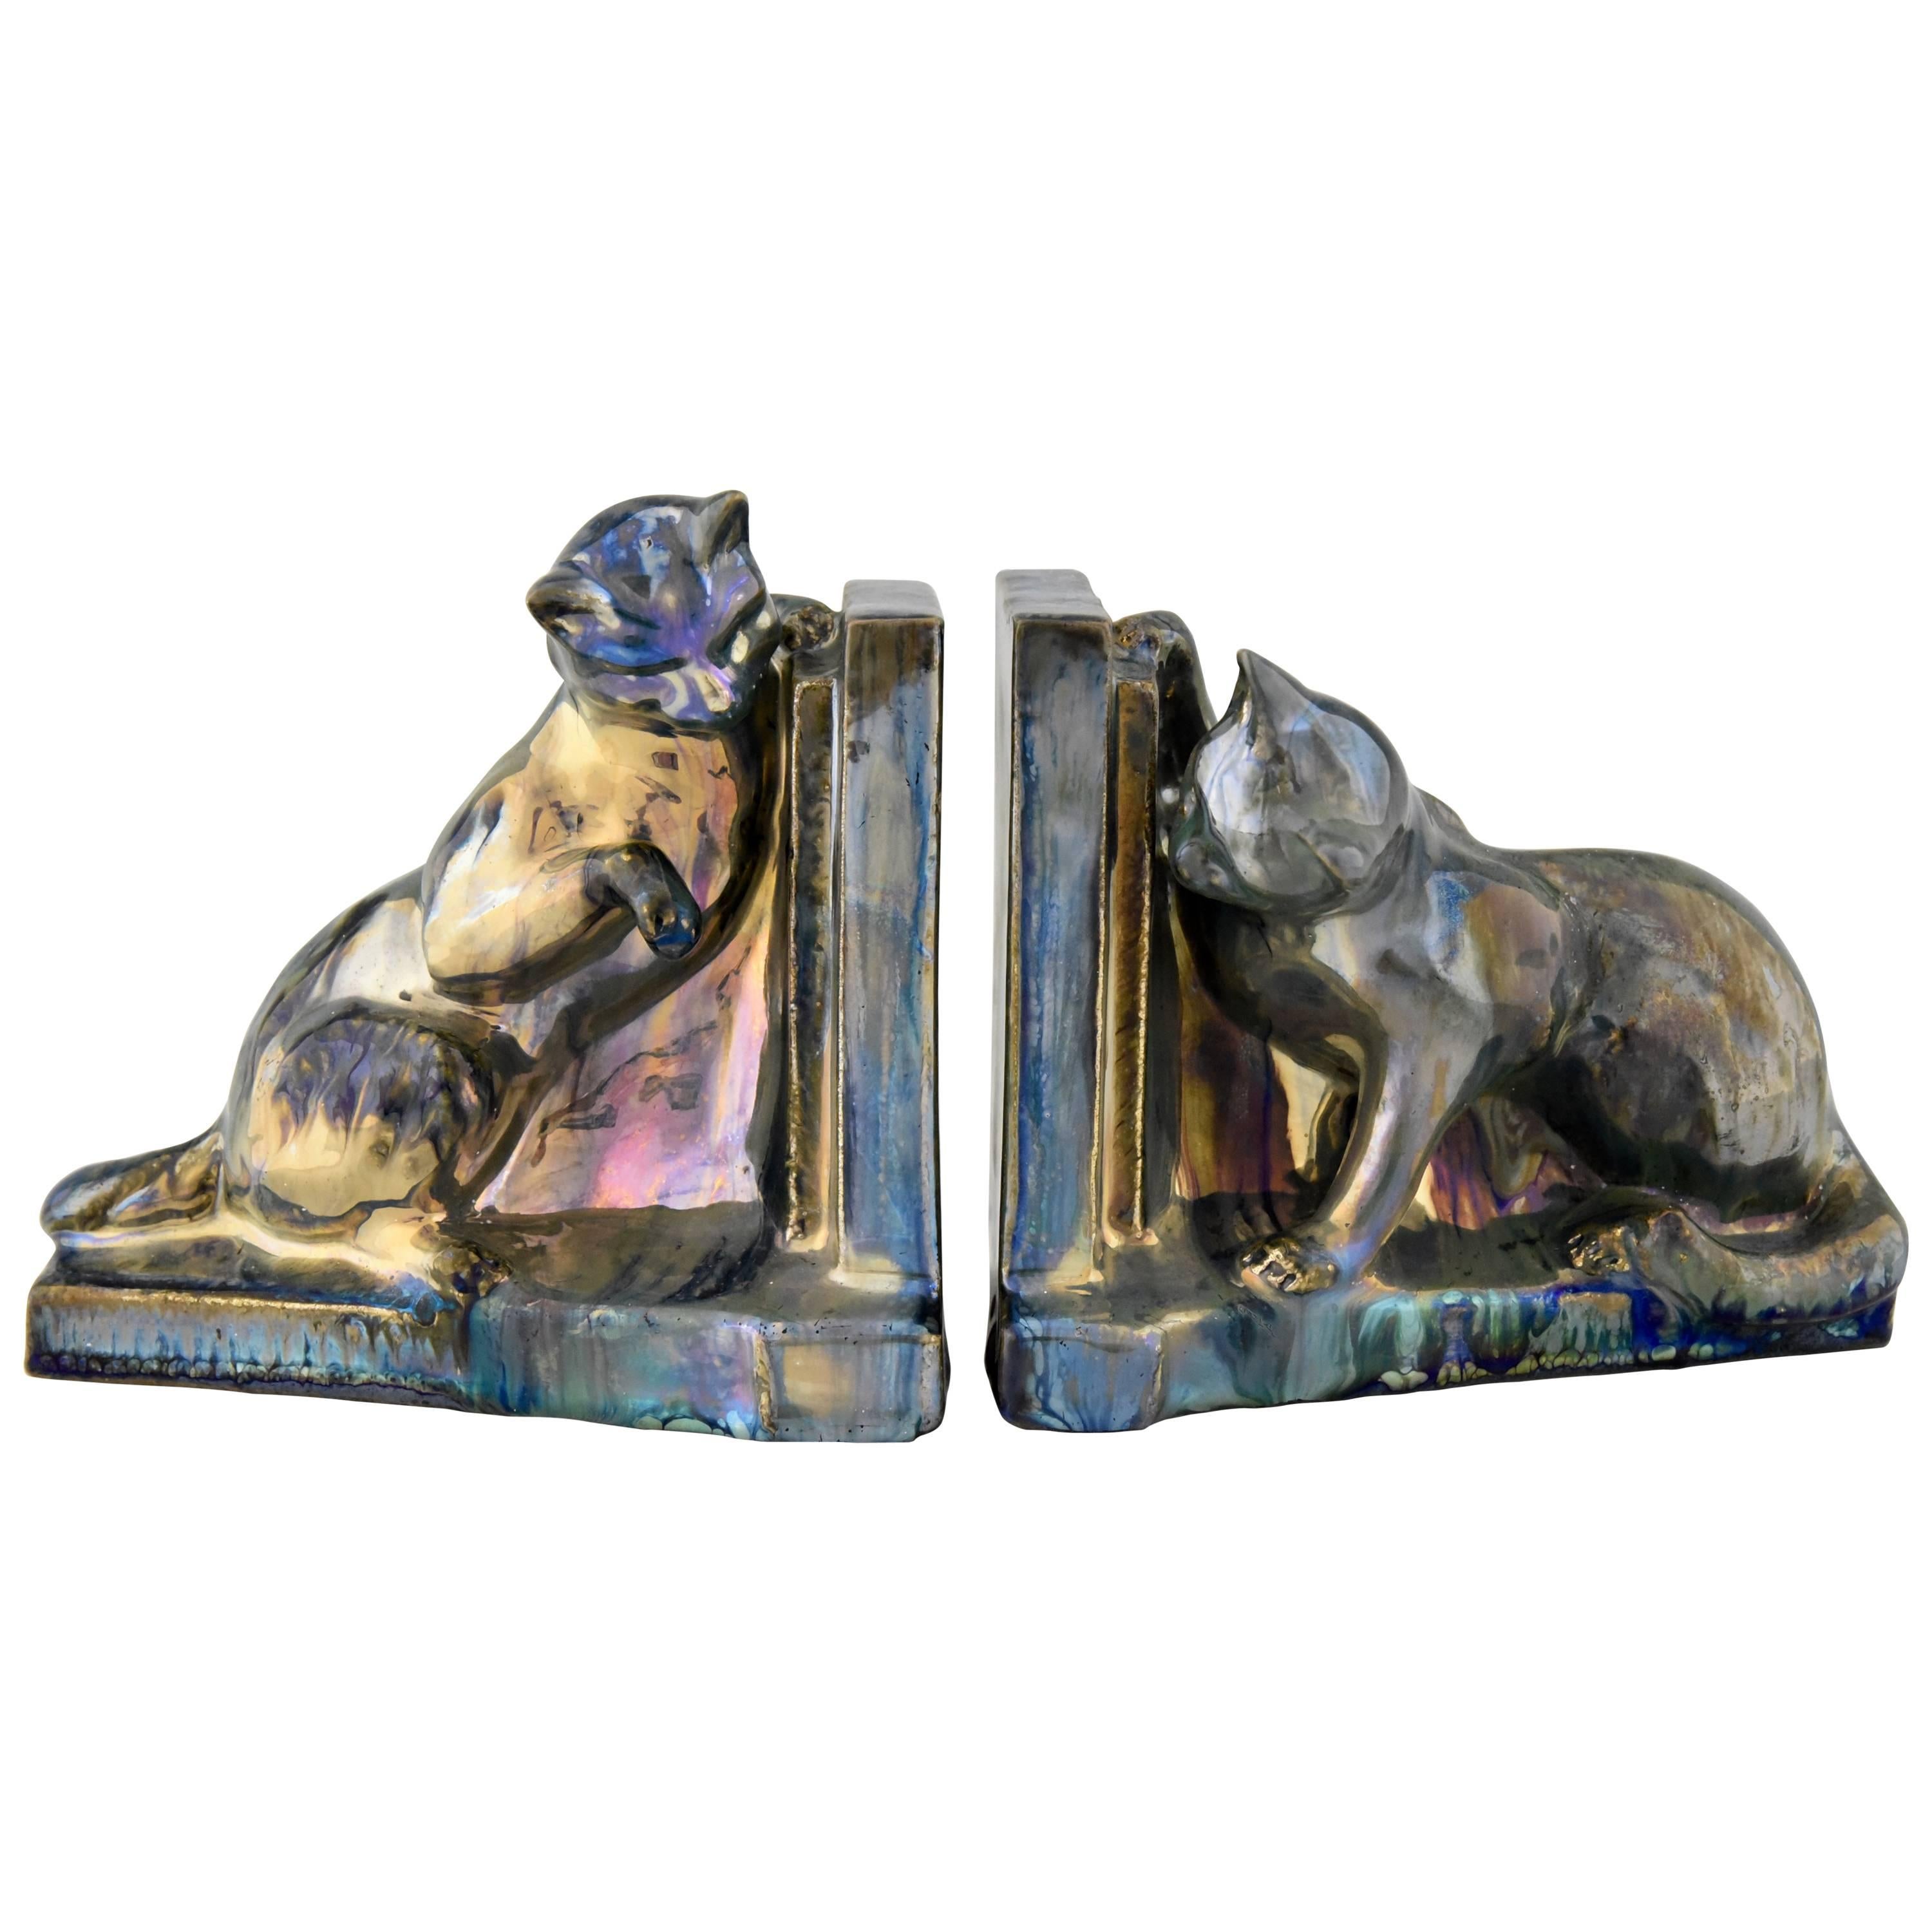 Art Deco Ceramic Cat Bookends A. Cytère for Rambervillers, 1931